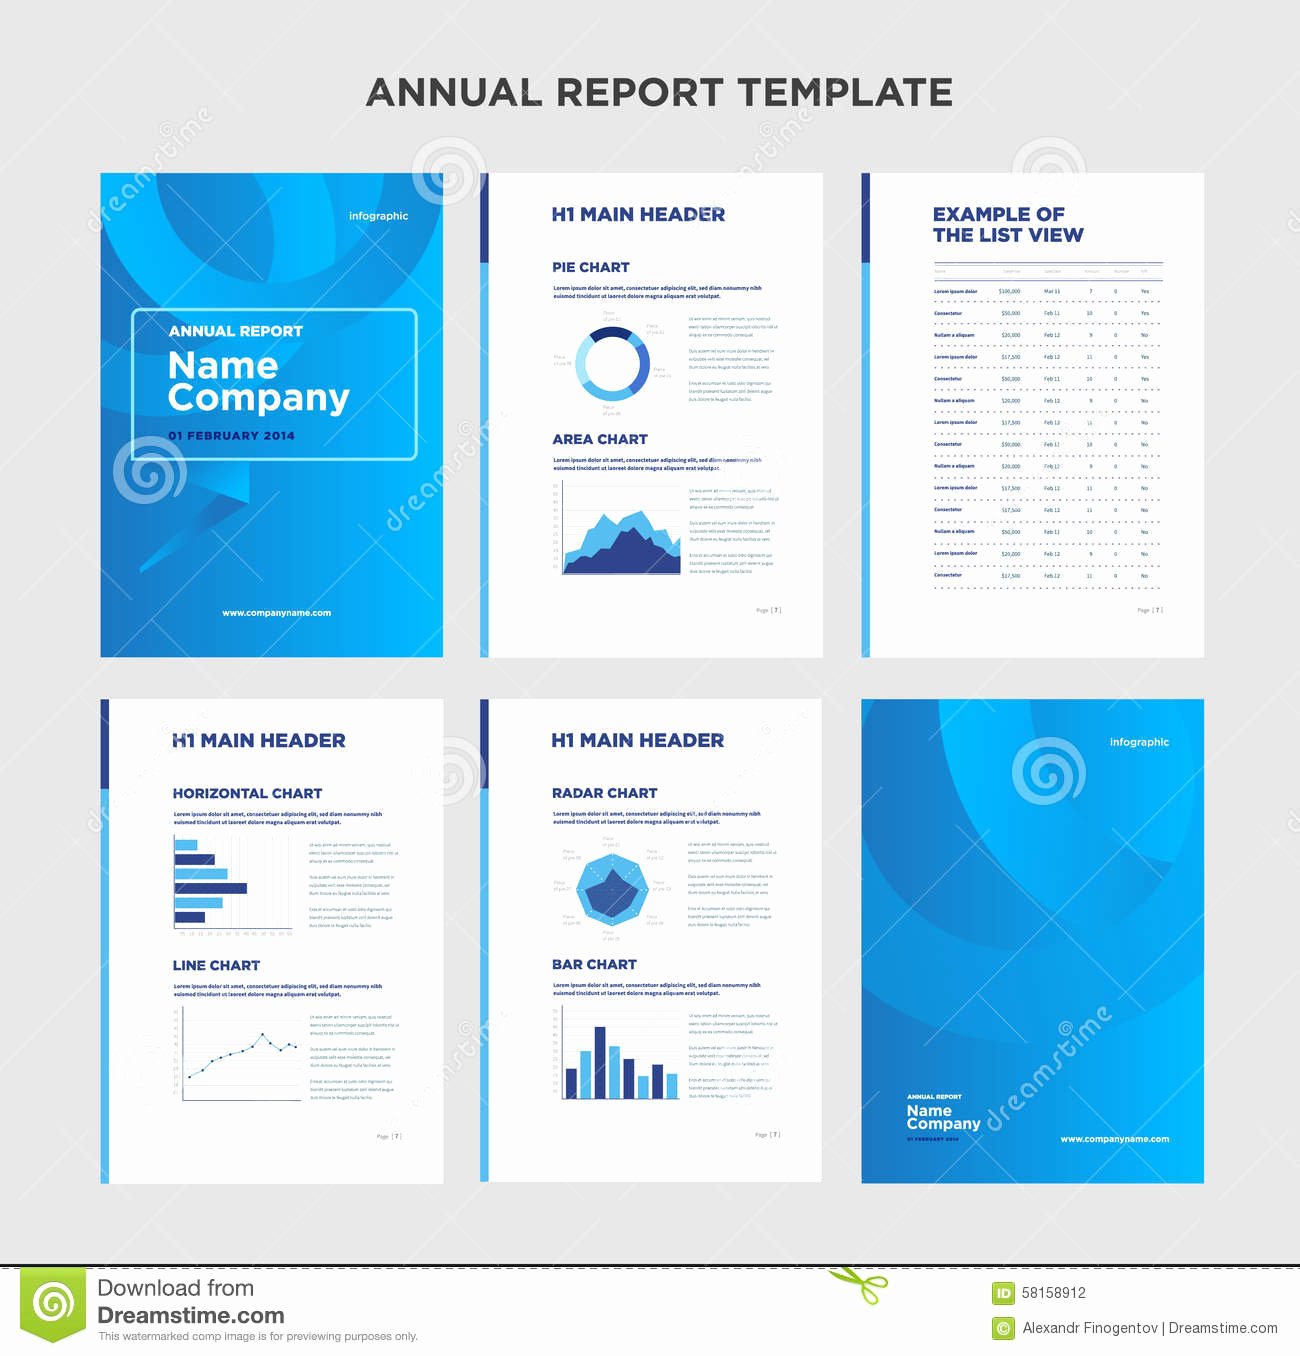 Annual Report Template with Cover Design and Infographic